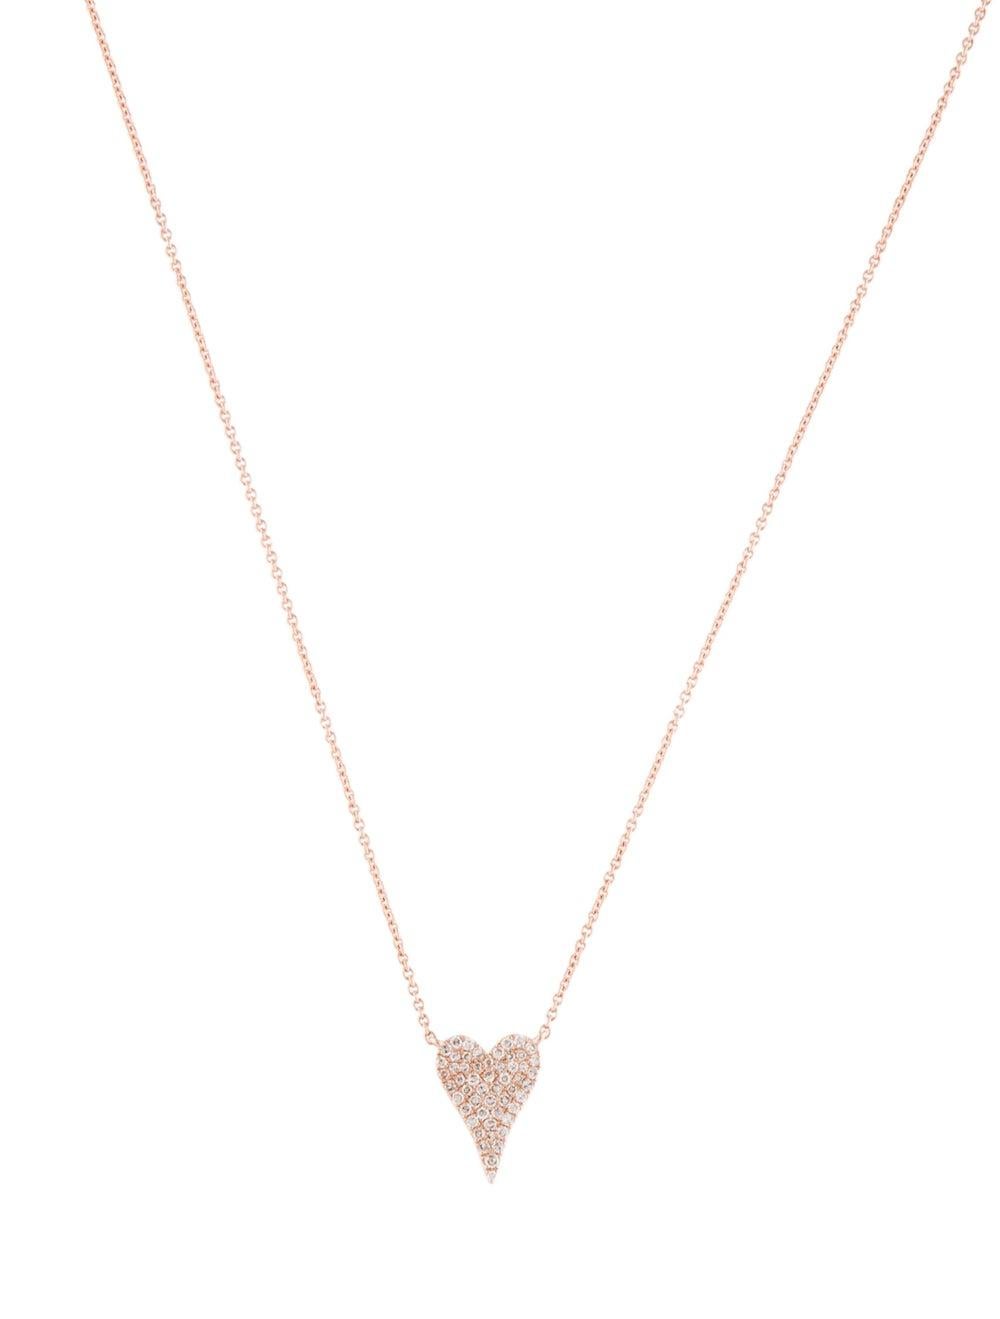 Quality Heart Necklace: Made from real 14k gold and round diamonds approximately 0.14 ct. 53 Certified diamonds, available in white, rose, yellow gold chain length is adjustable to 16